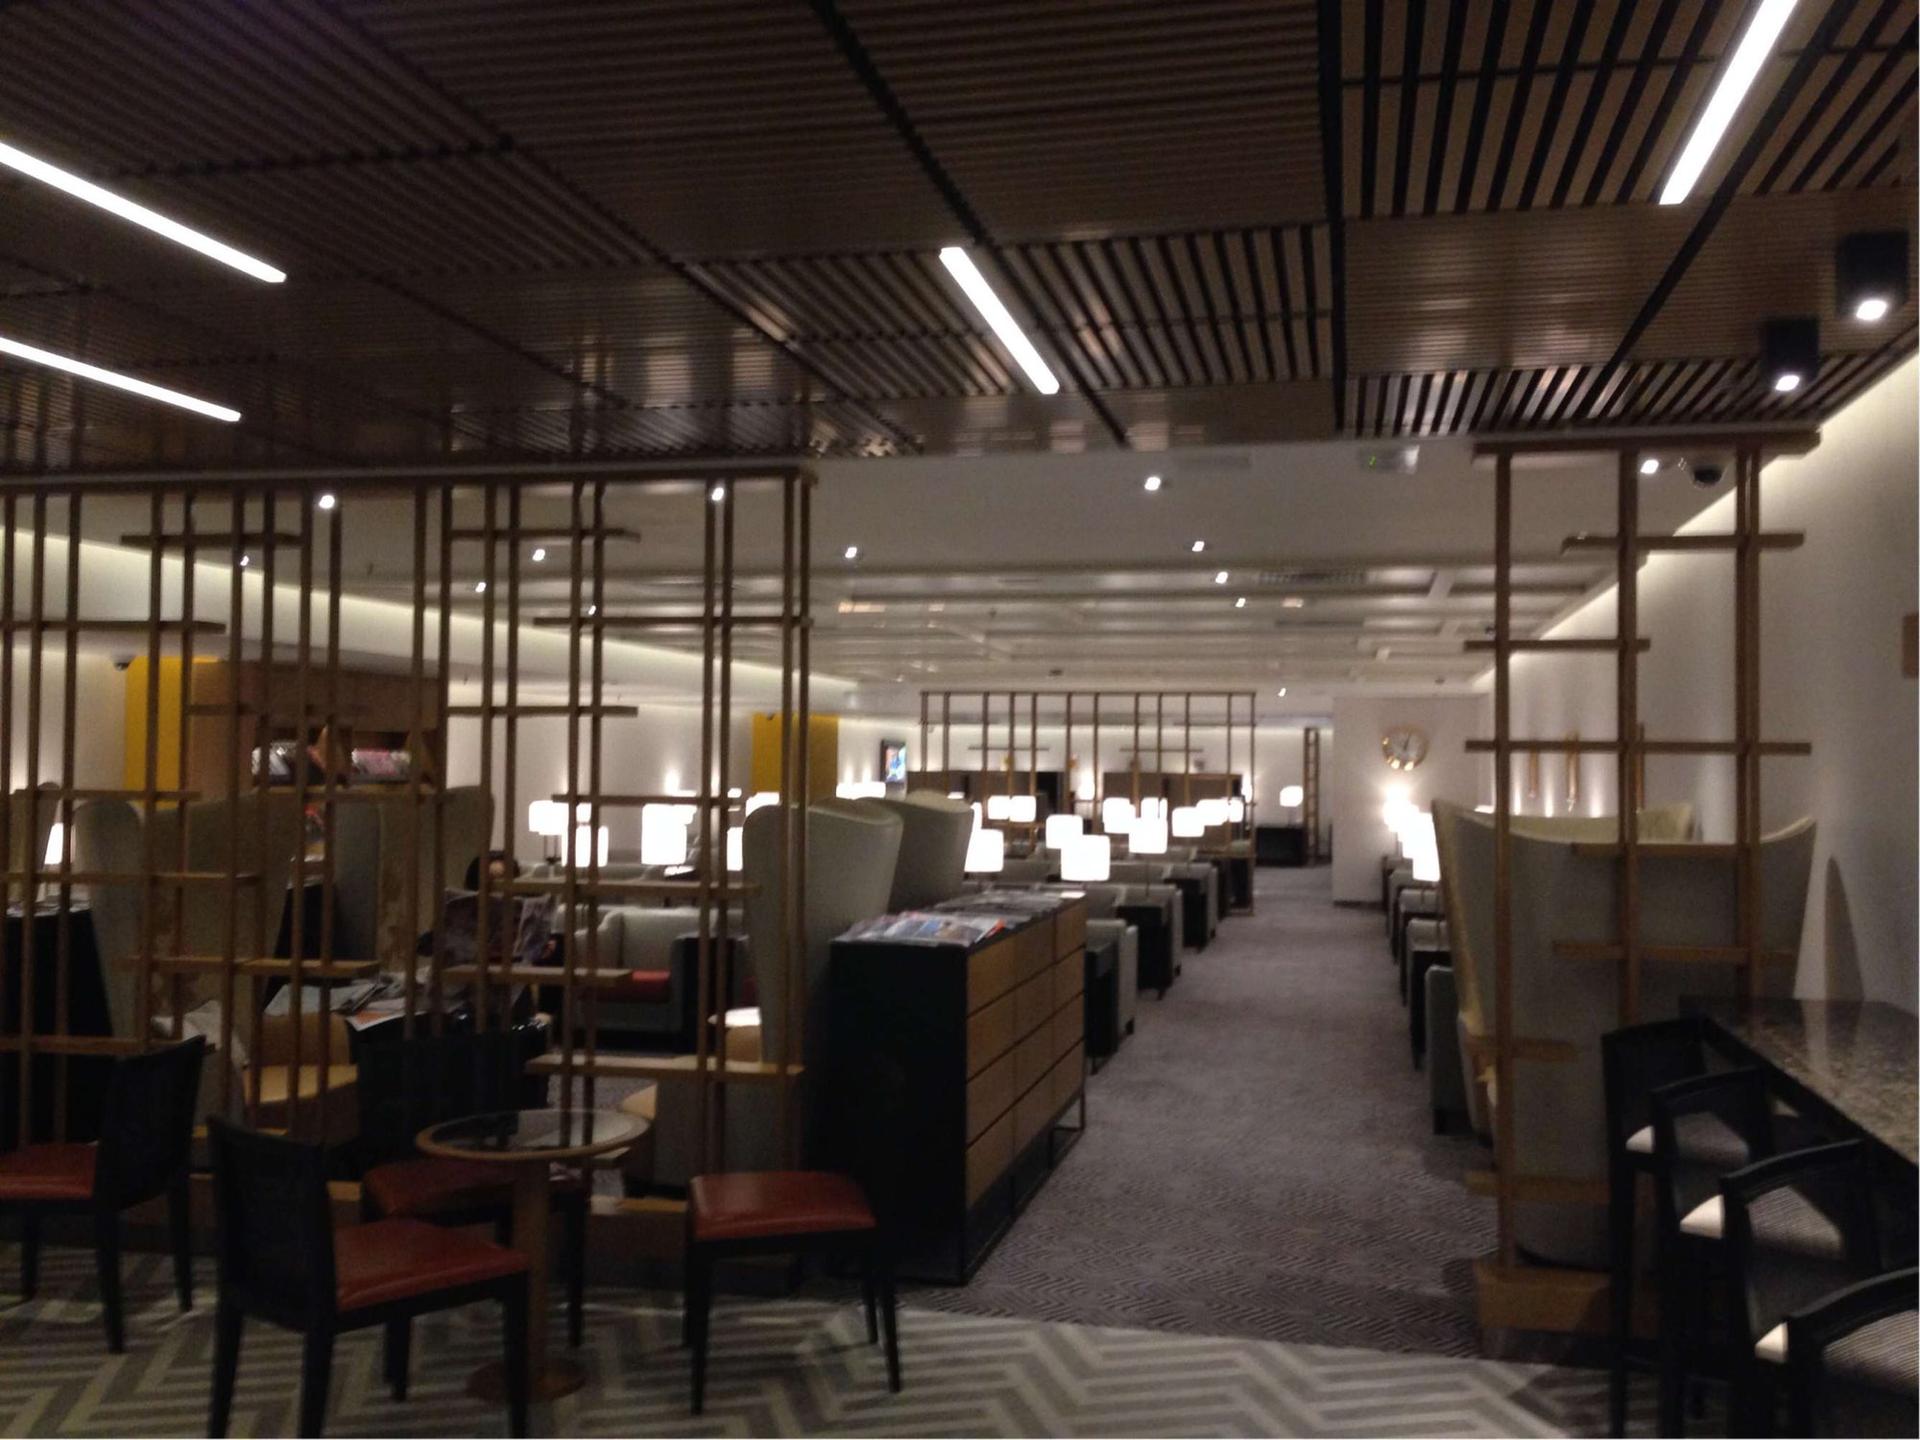 Singapore Airlines SilverKris Business Class Lounge image 62 of 68